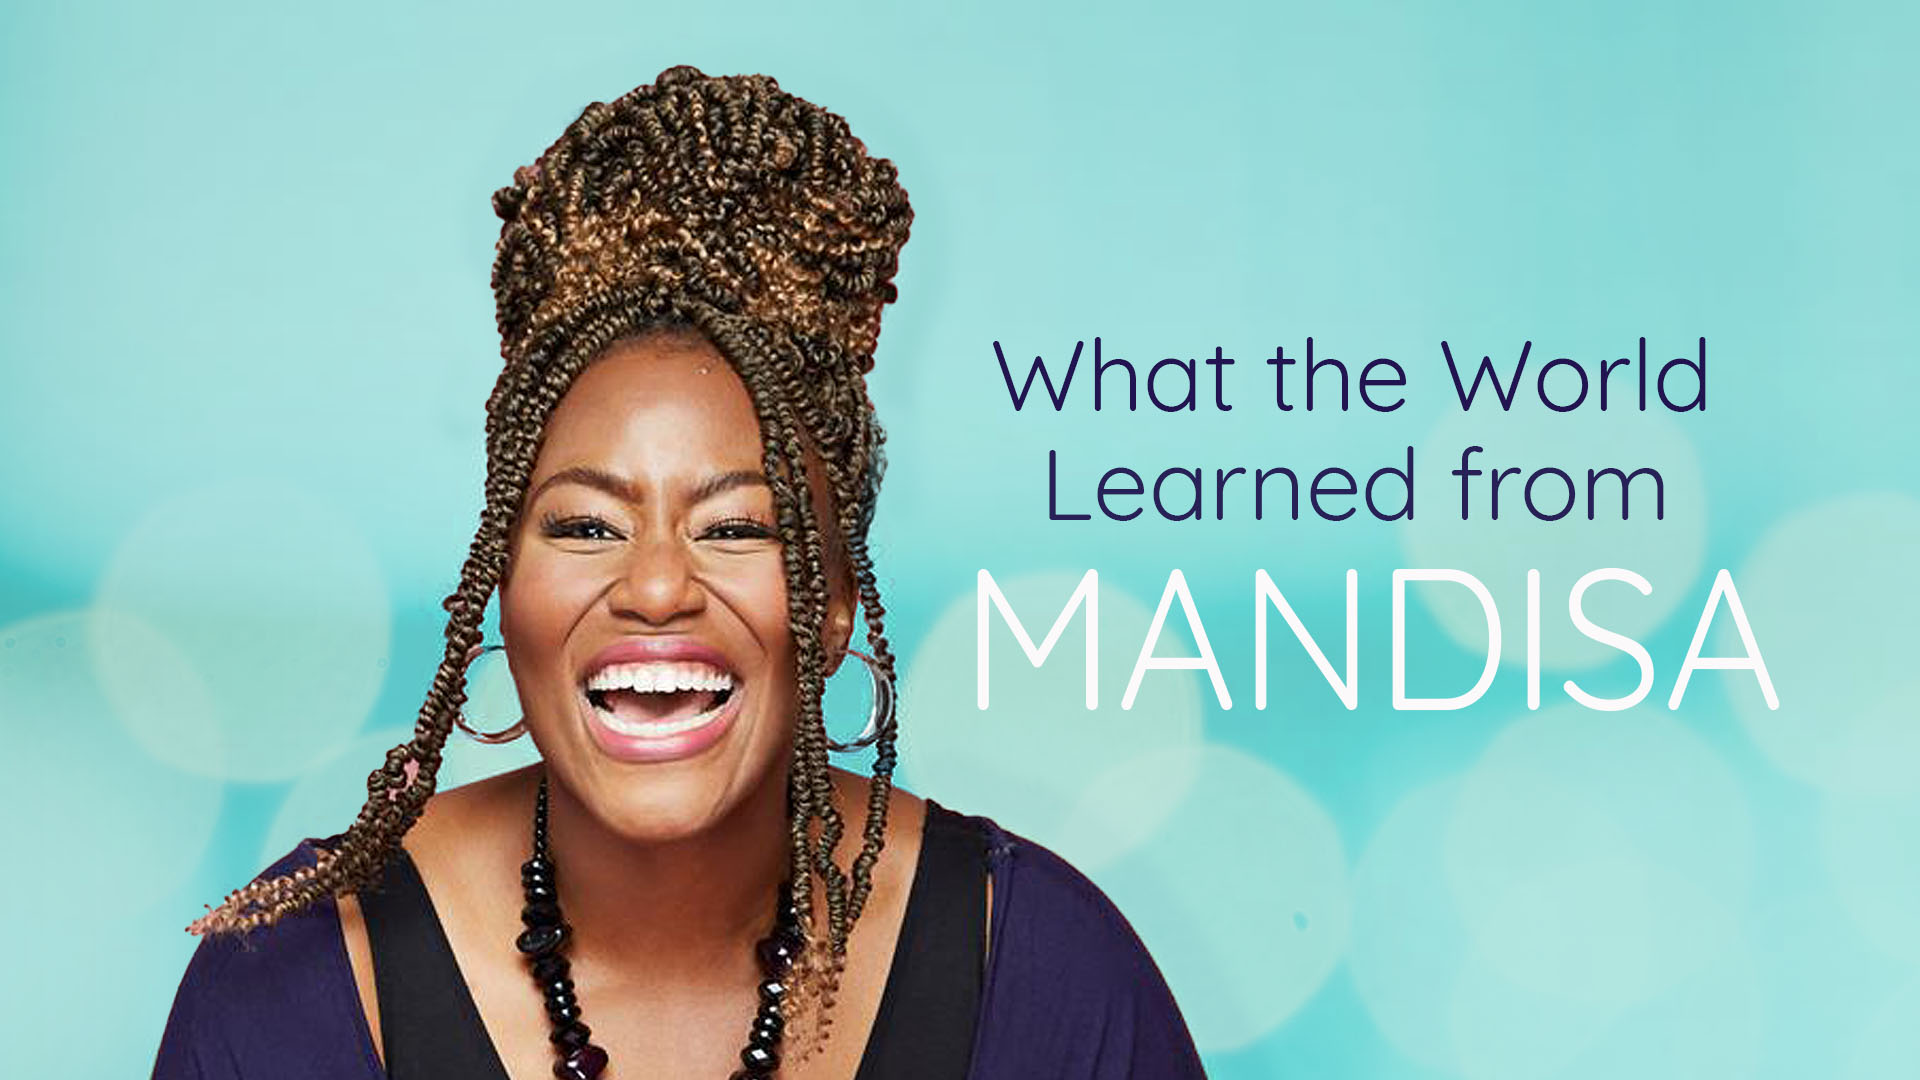 "What the World Learned from Mandisa" and a headshot of Mandisa smiling